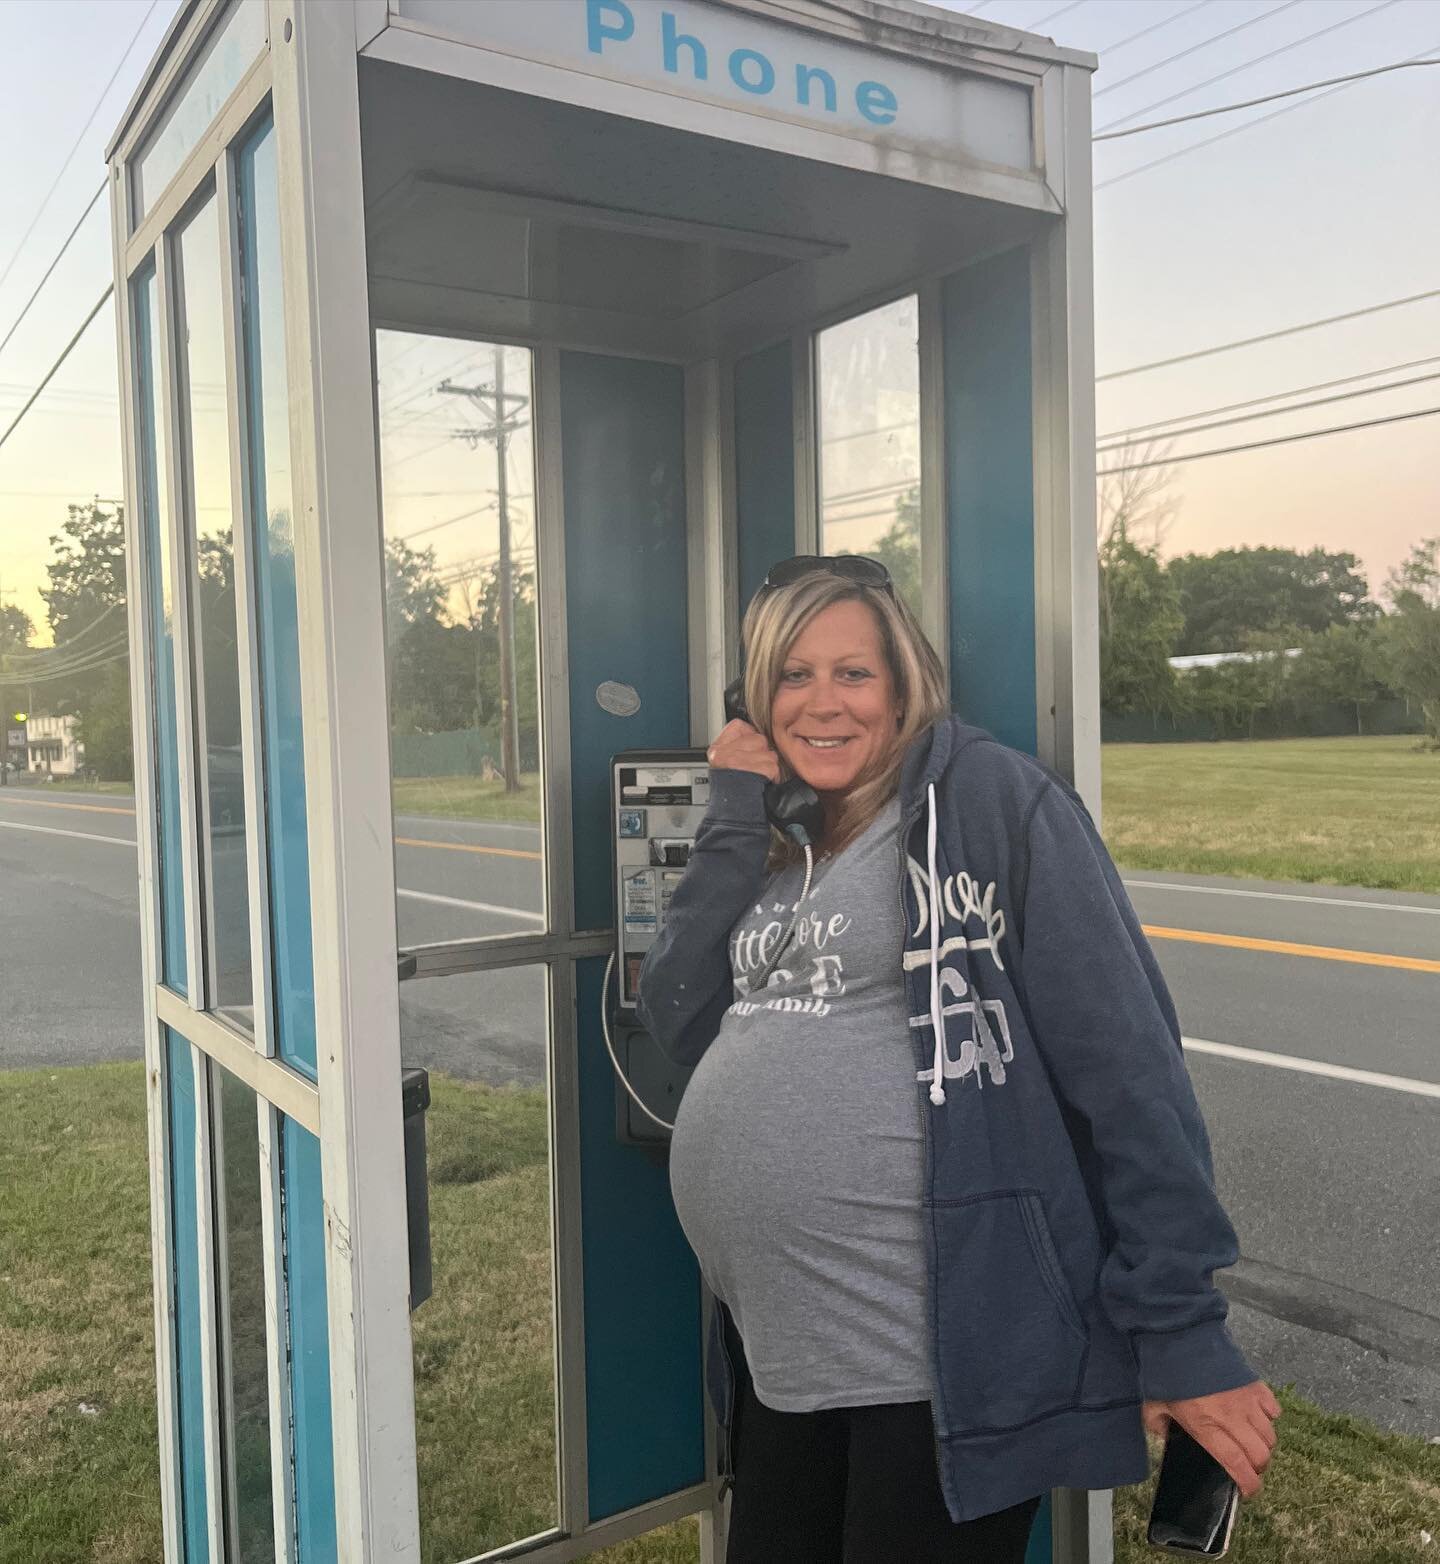 My kid sister Melissa is now getting into the action, and she is 9-months pregnant with her 4th child. LITERALLY, we will have a new niece next week.

I guess my project is affecting my entire family.

Oh yeah, this payphone does work!

Daisy Family 